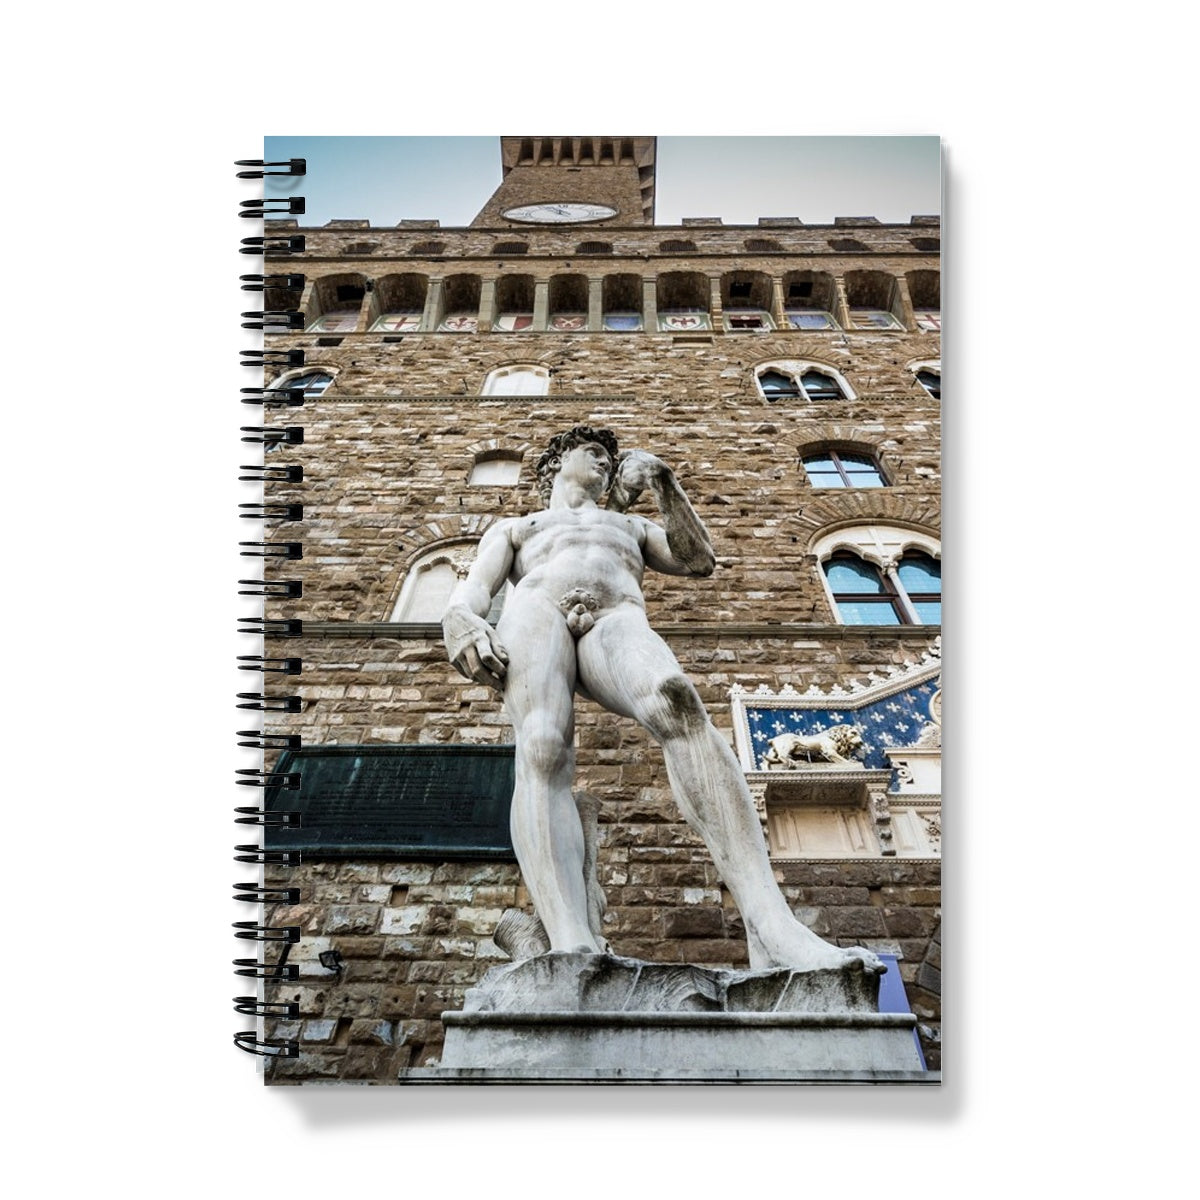 Statue of David overlooking Piazza della Signoria, with Palazzo Vecchio behind. Florence, Italy. Notebook